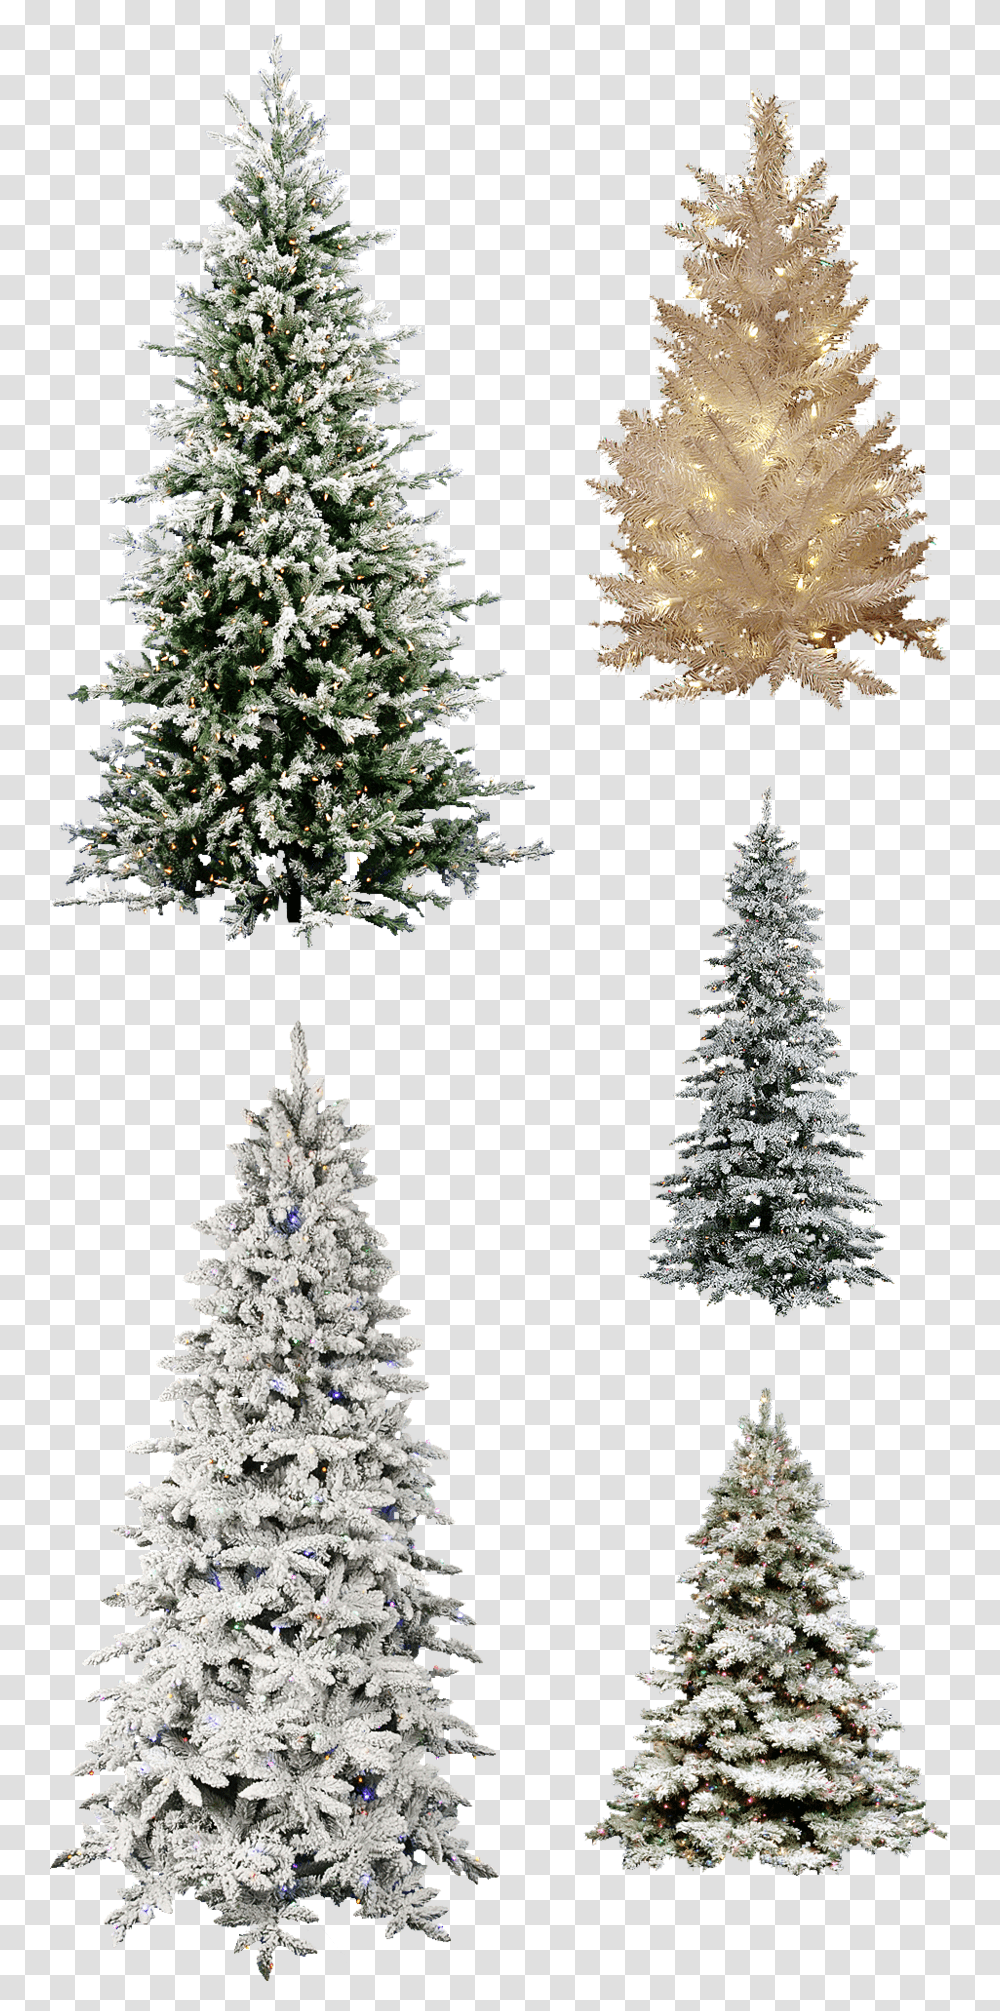 Misc Frosted Christmas Tree Pngs Christmas Tree, Plant, Ornament, Pine, Conifer Transparent Png